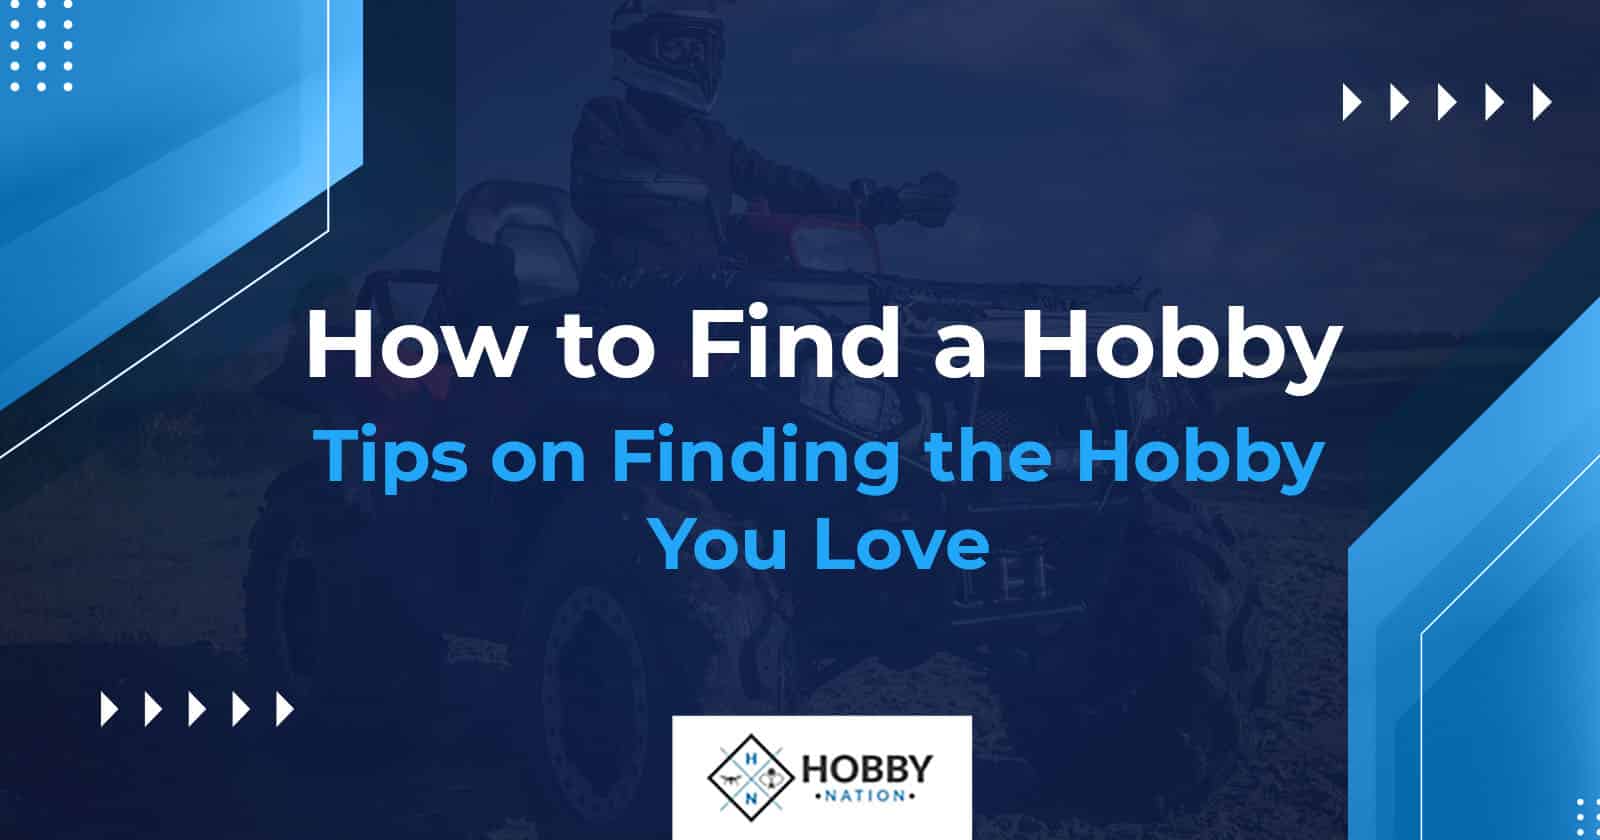 How to Find a Hobby &#8211; Tips on Finding the Hobby You Love